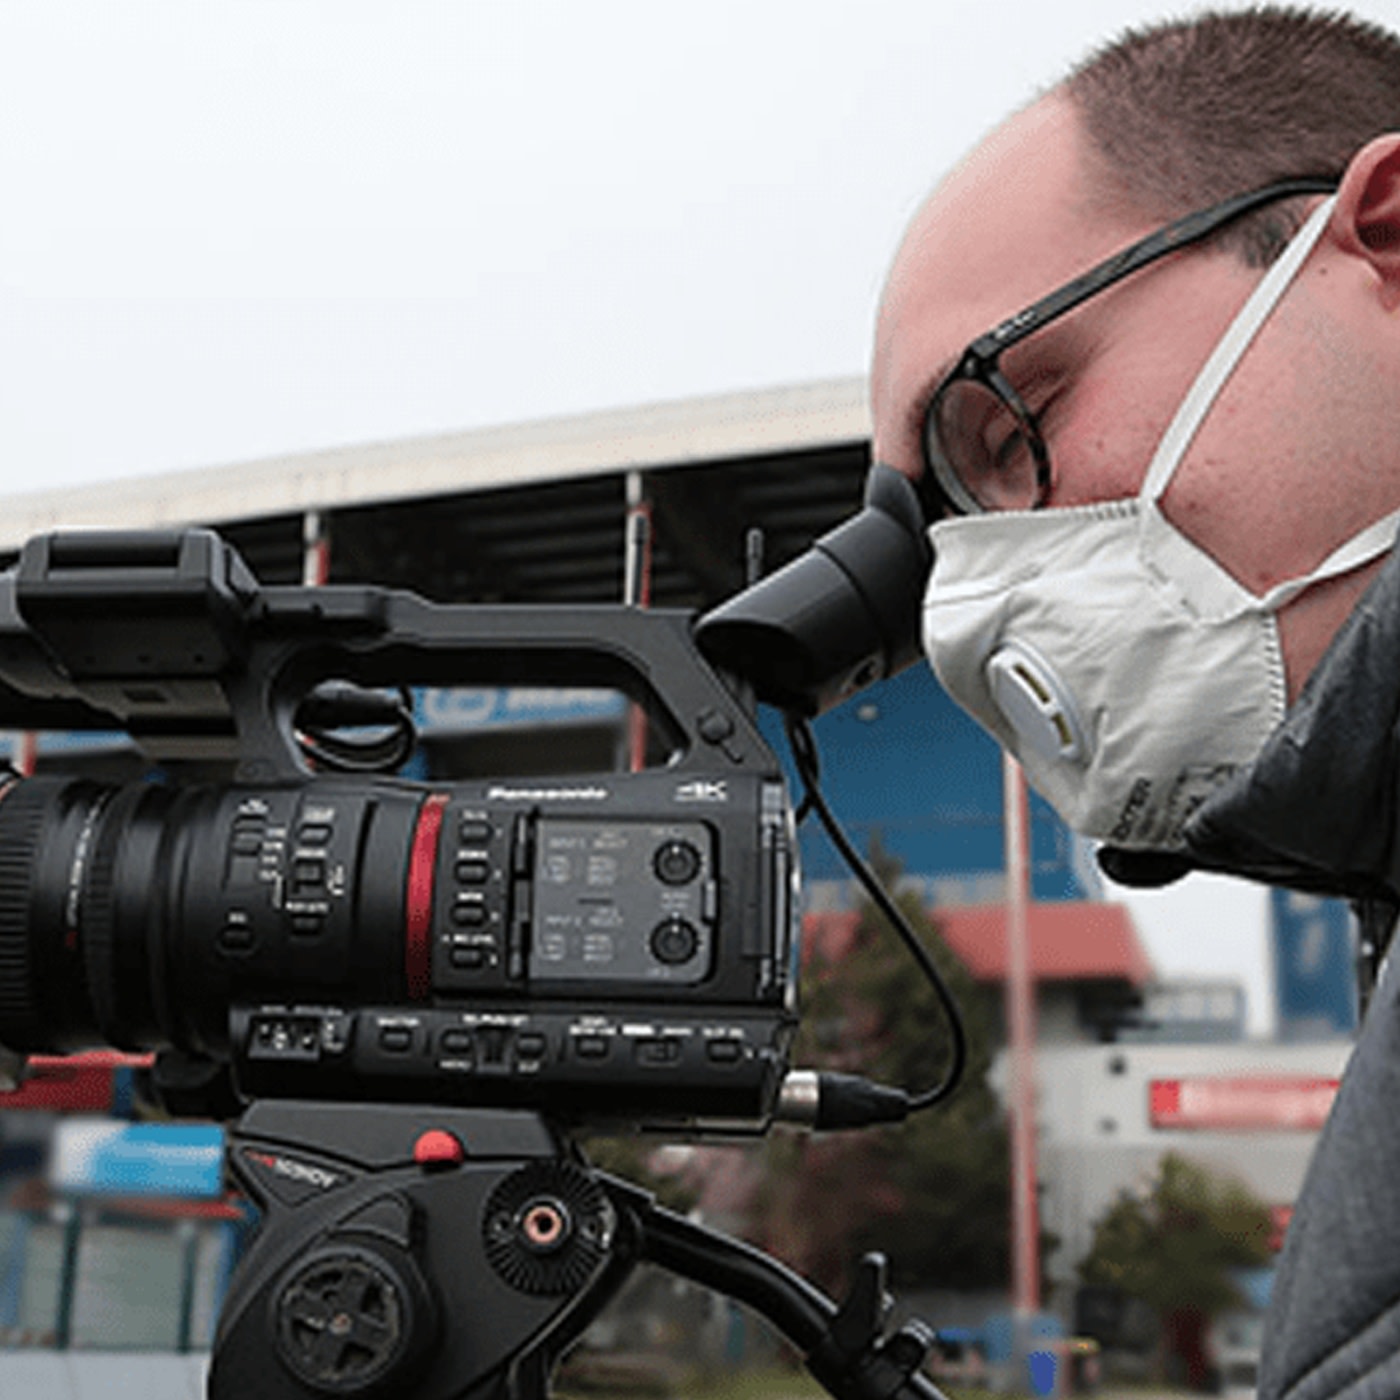 Video Production During a Pandemic